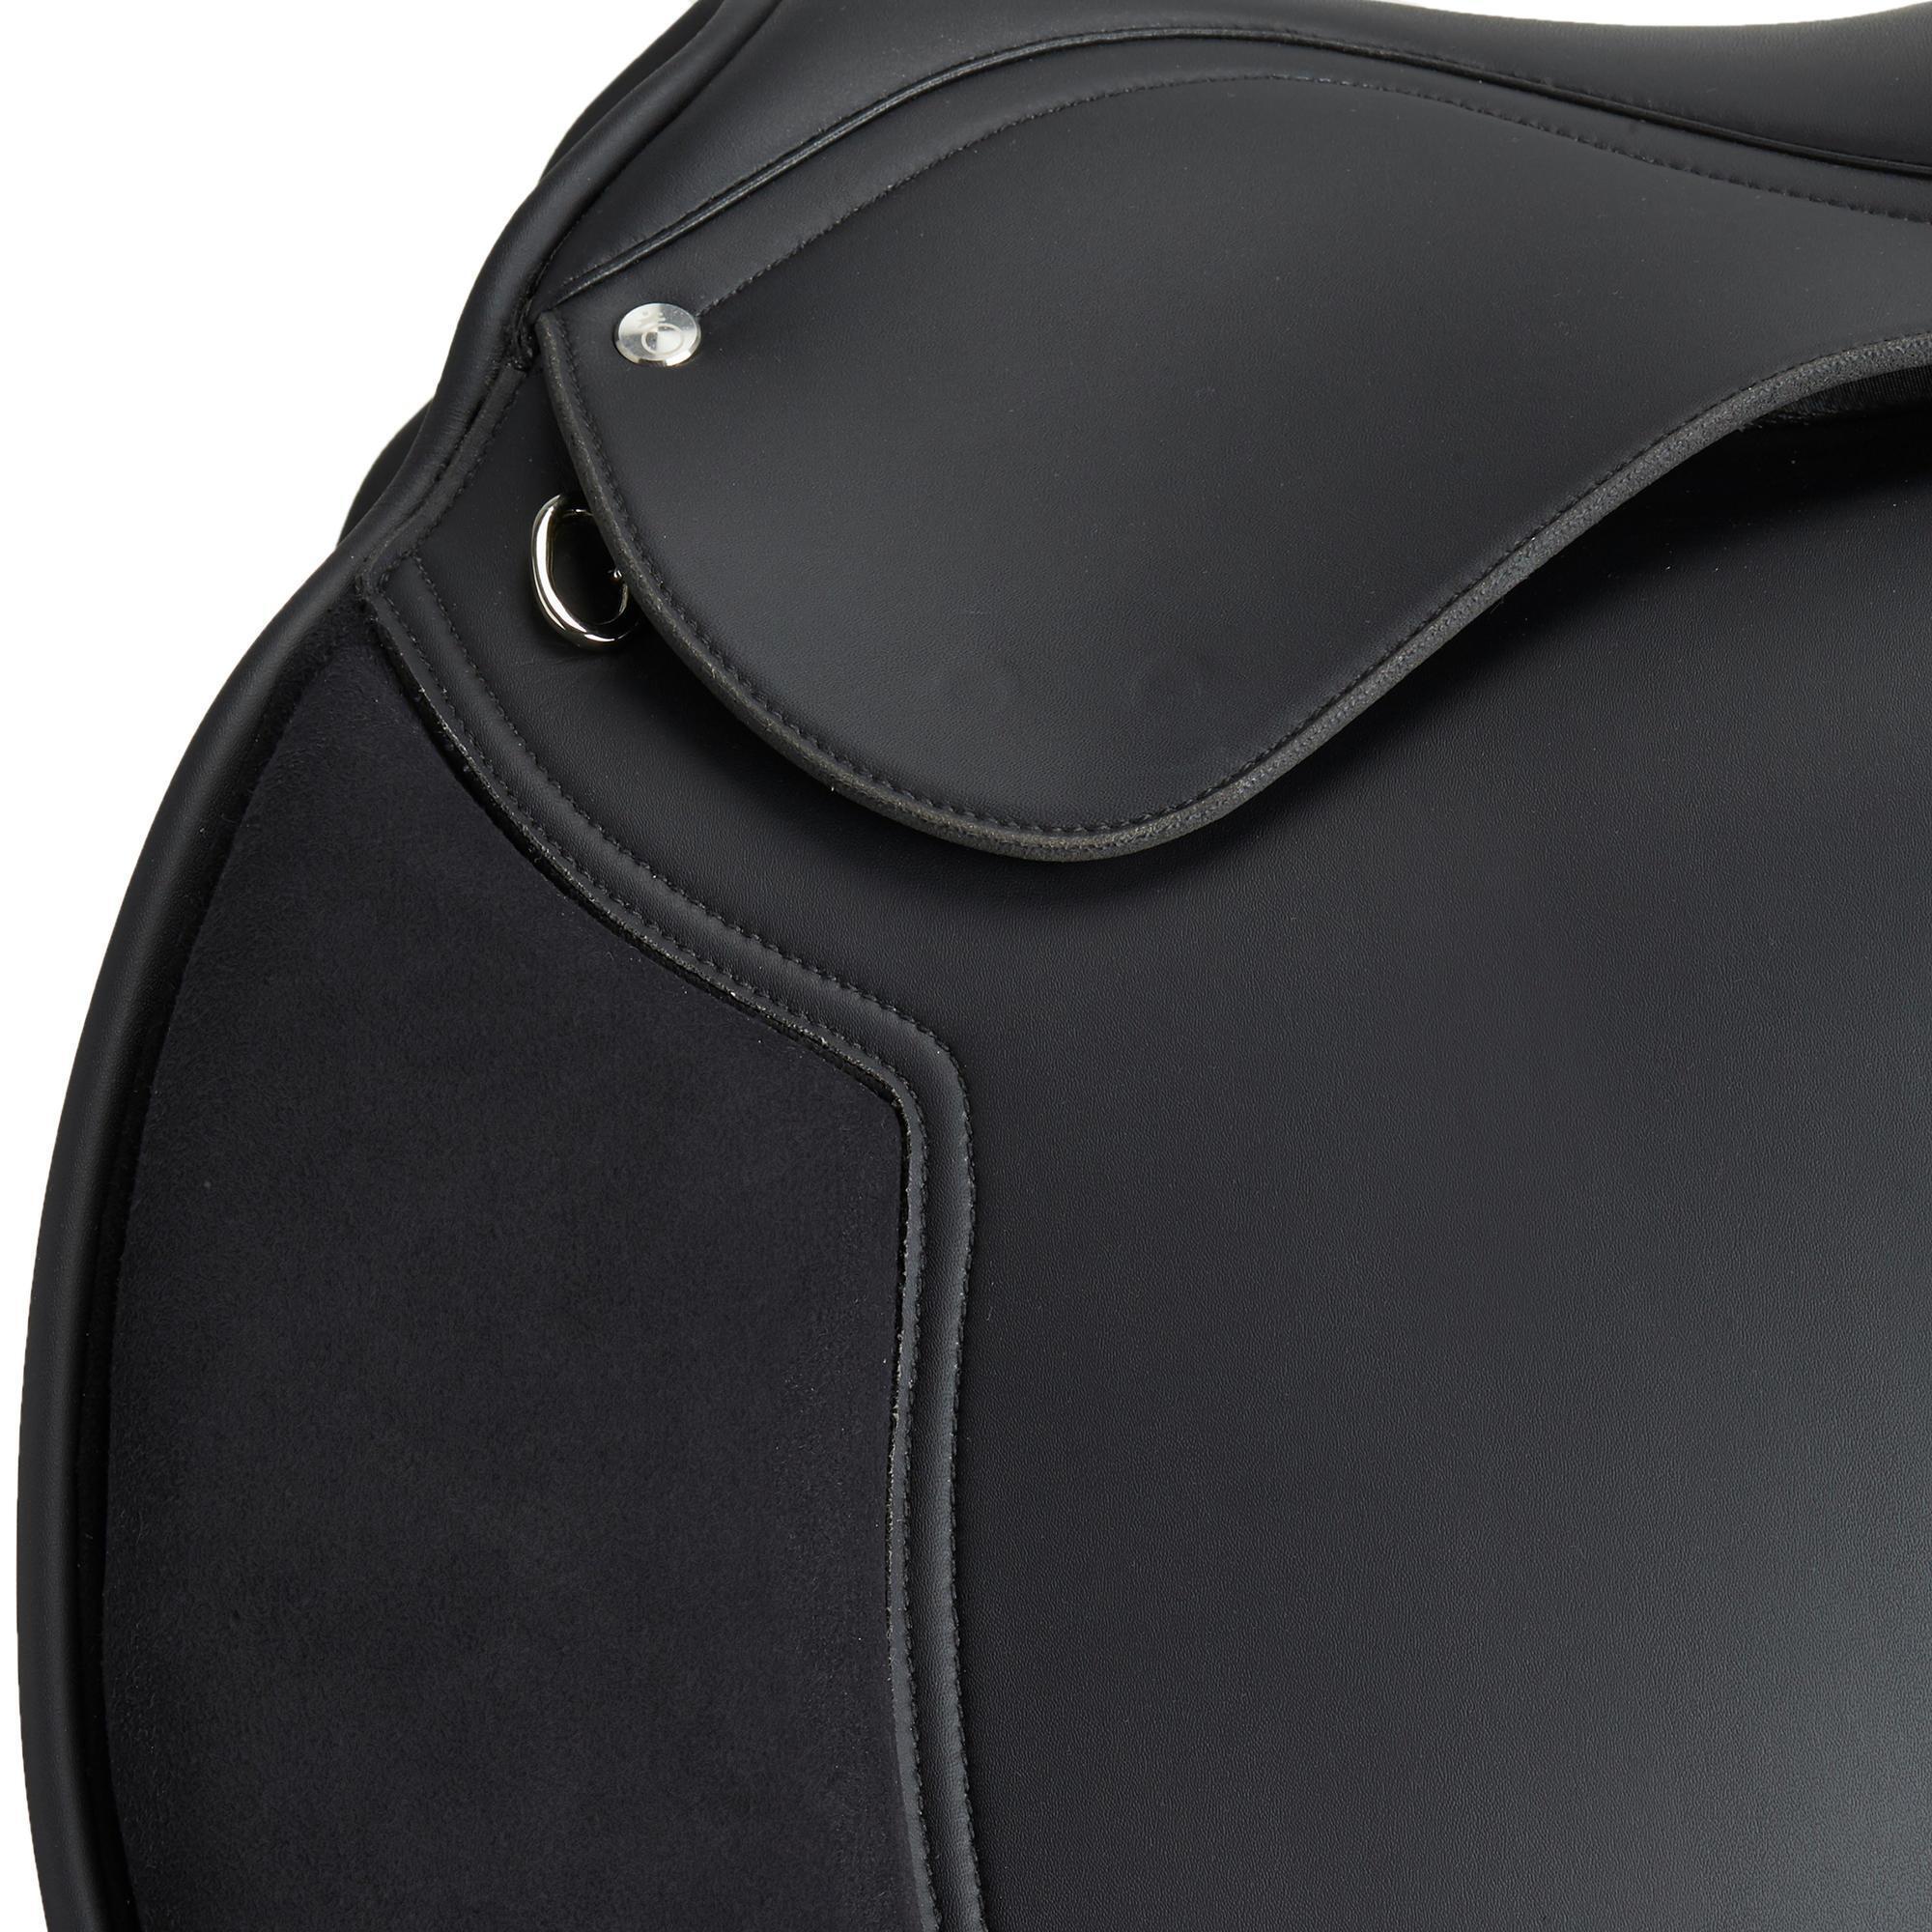 Synthia Horse Riding Synthetic 17.5" All-Purpose Saddle For Horse - Black 12/15